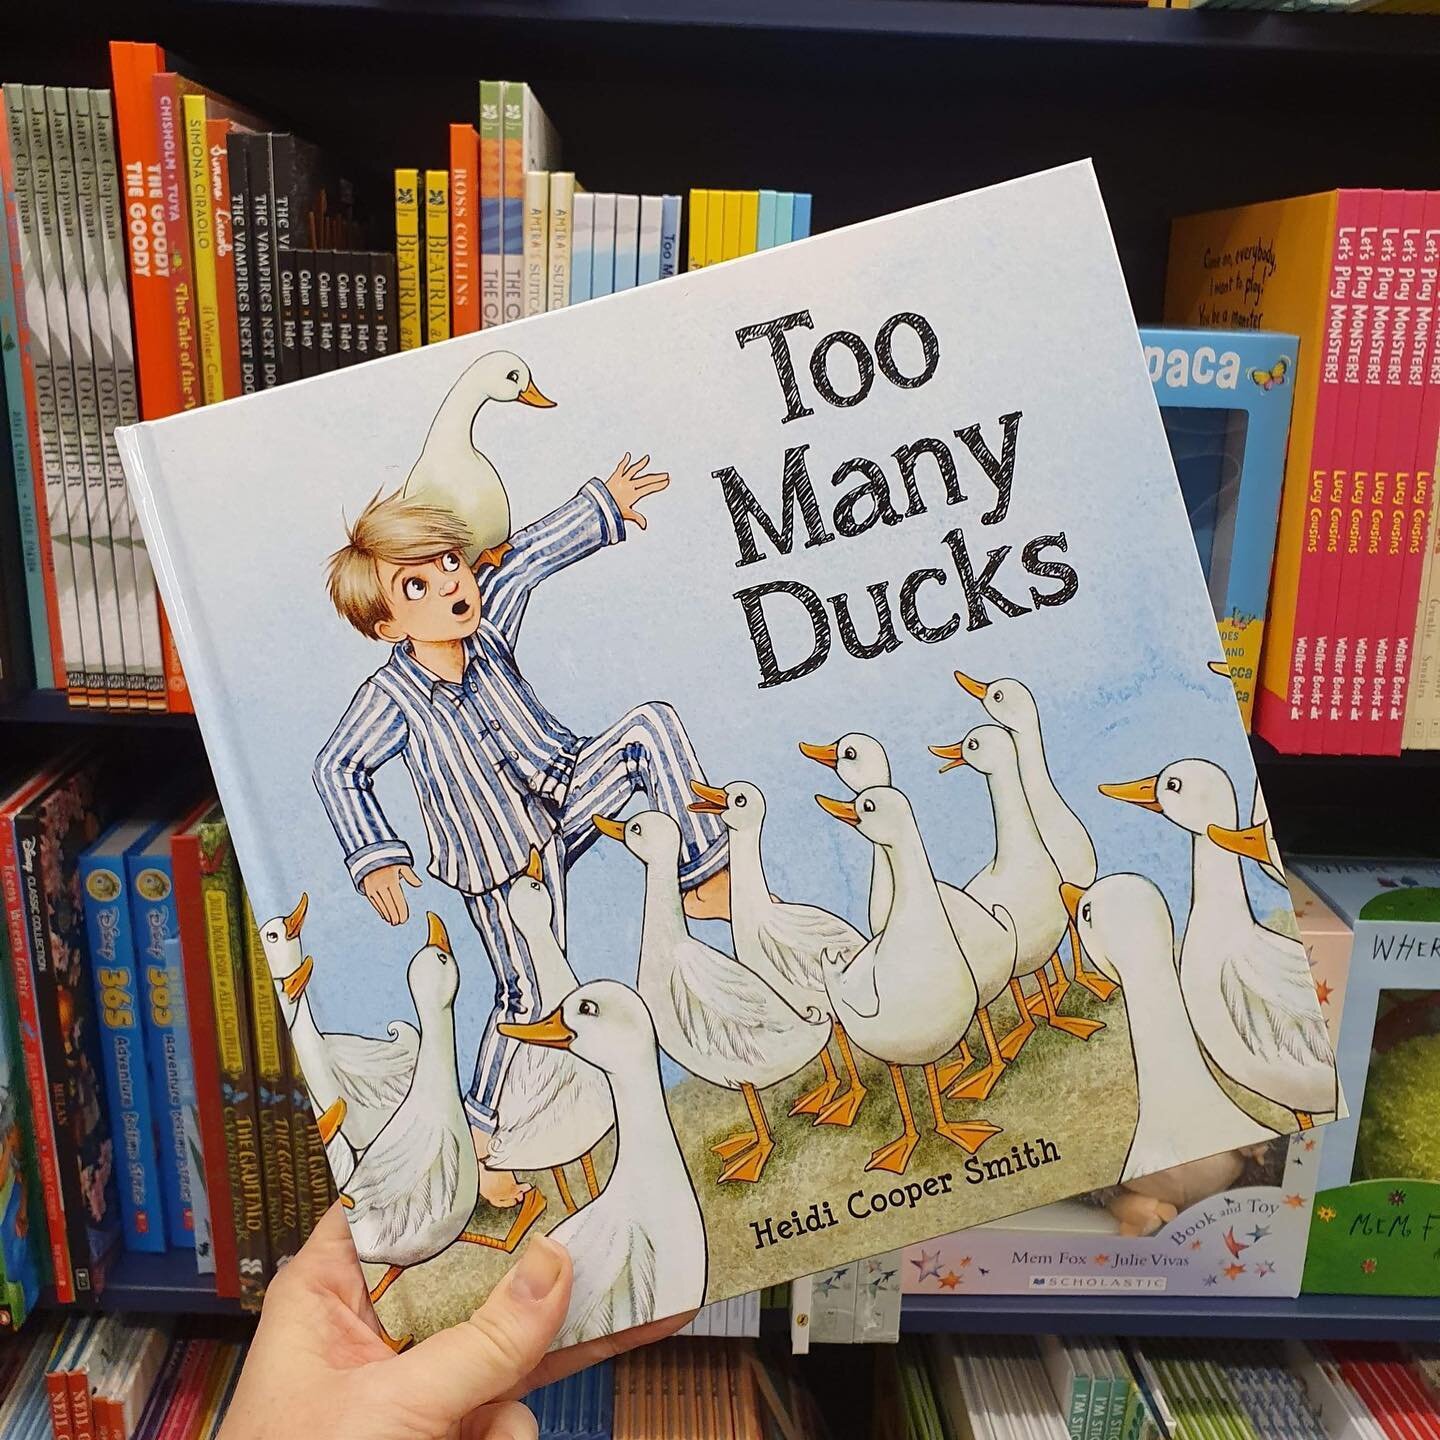 Spotted at my dear friend&rsquo;s favourite book shop - @collinsbooksellerswagga 
If you spot Too Many Ducks somewhere too, I&rsquo;d love for you to tag me!
.
.
.
.
#bookshop #picturebook #childrensbooks #ducklove #booksofinstagram #kidlitart